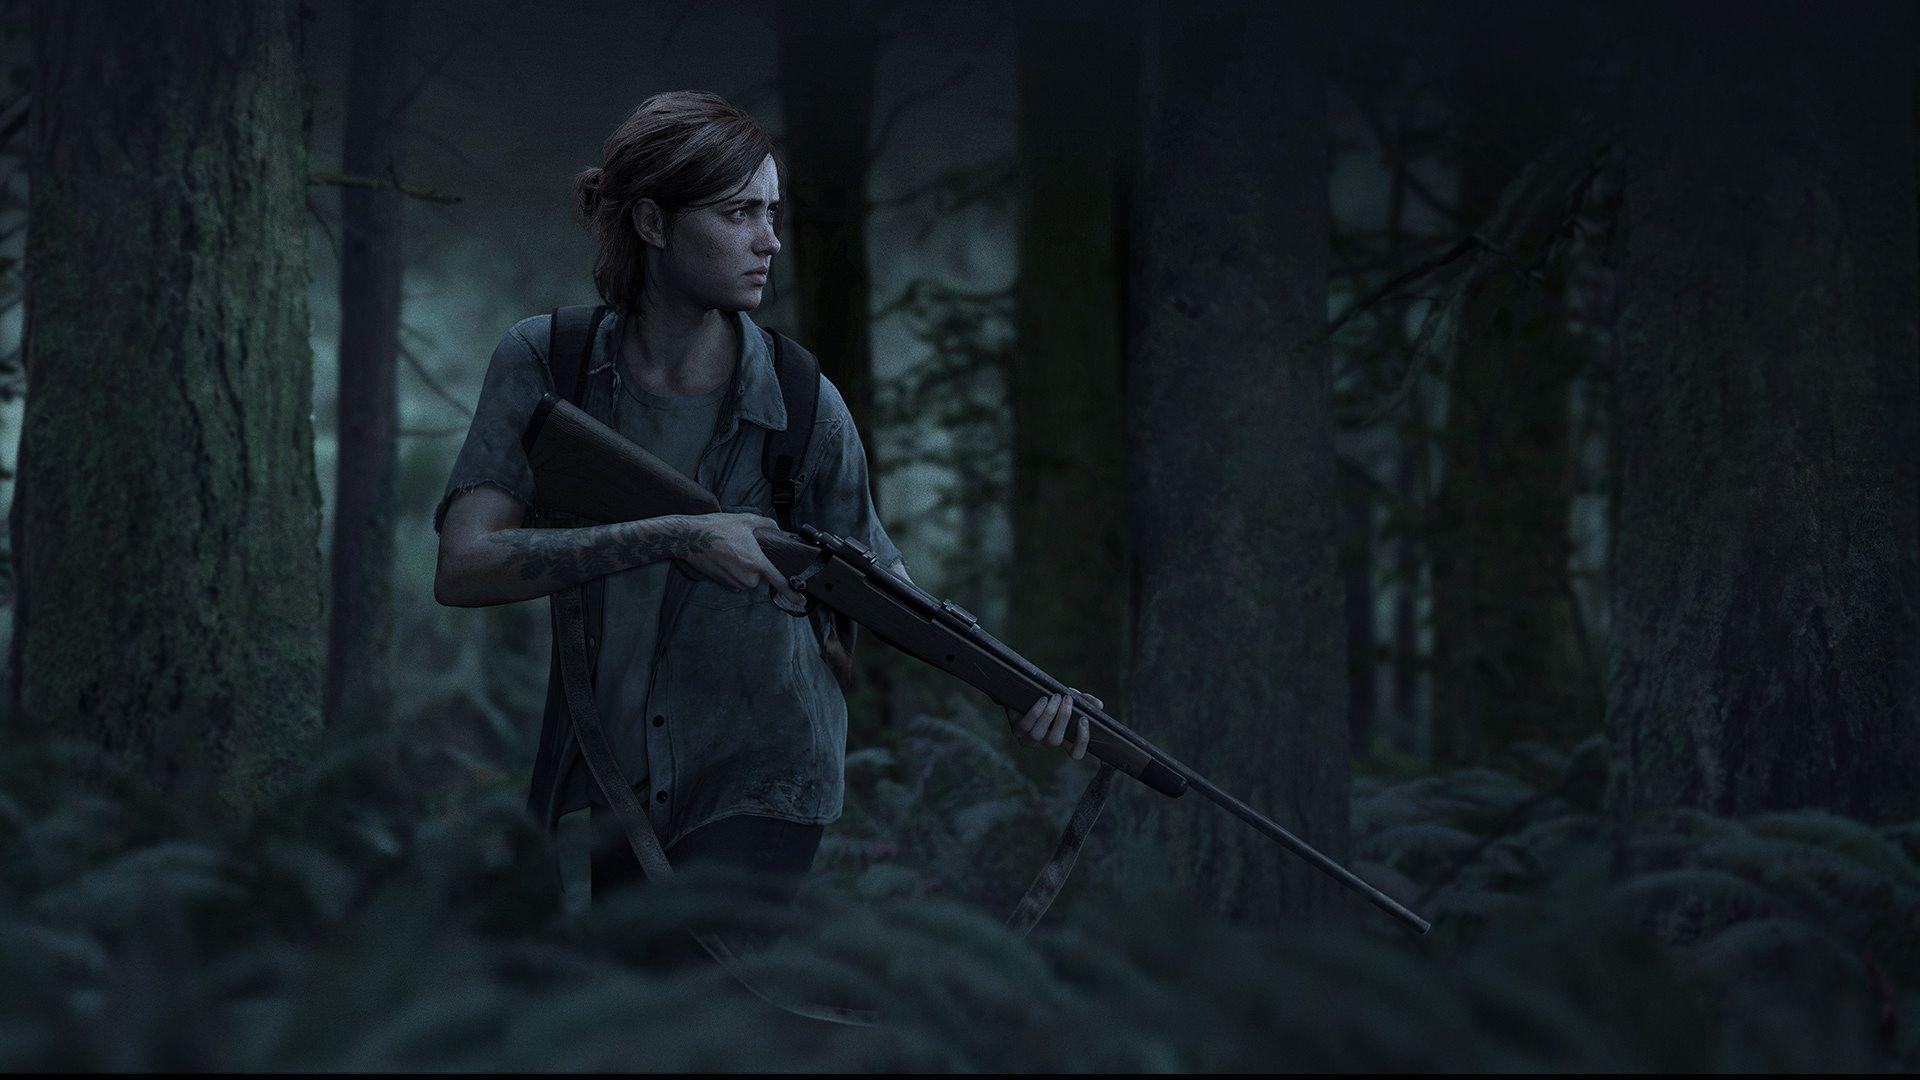 Desktop Wallpapers vdeo game The Last of Us 2 Blood 2560x1440